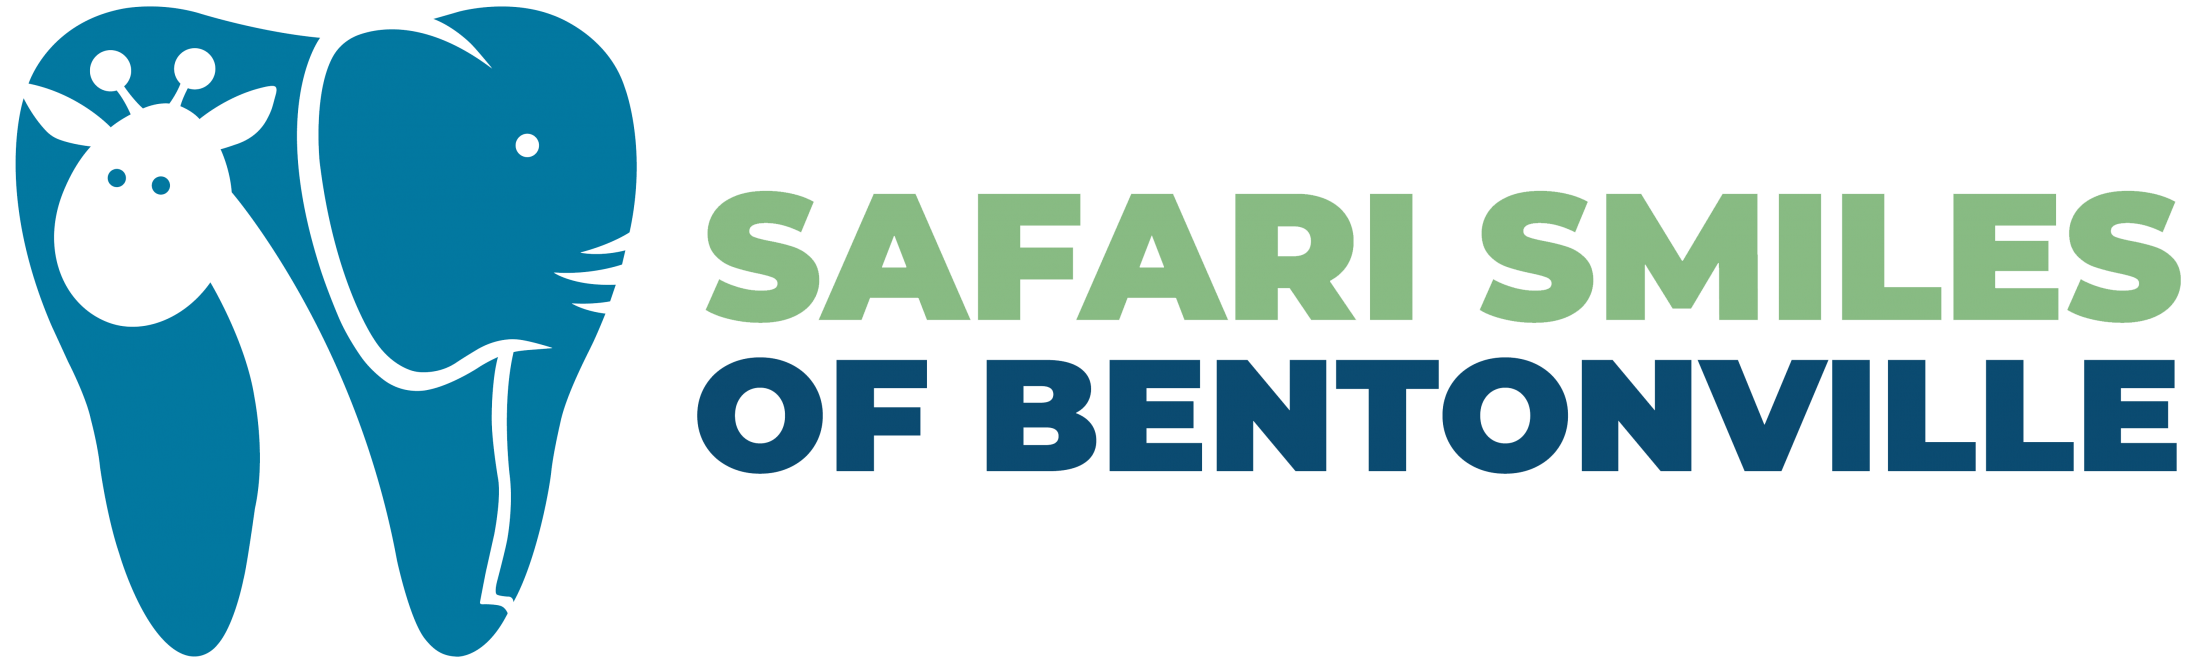 Link to Safari Smiles of Bentonville home page